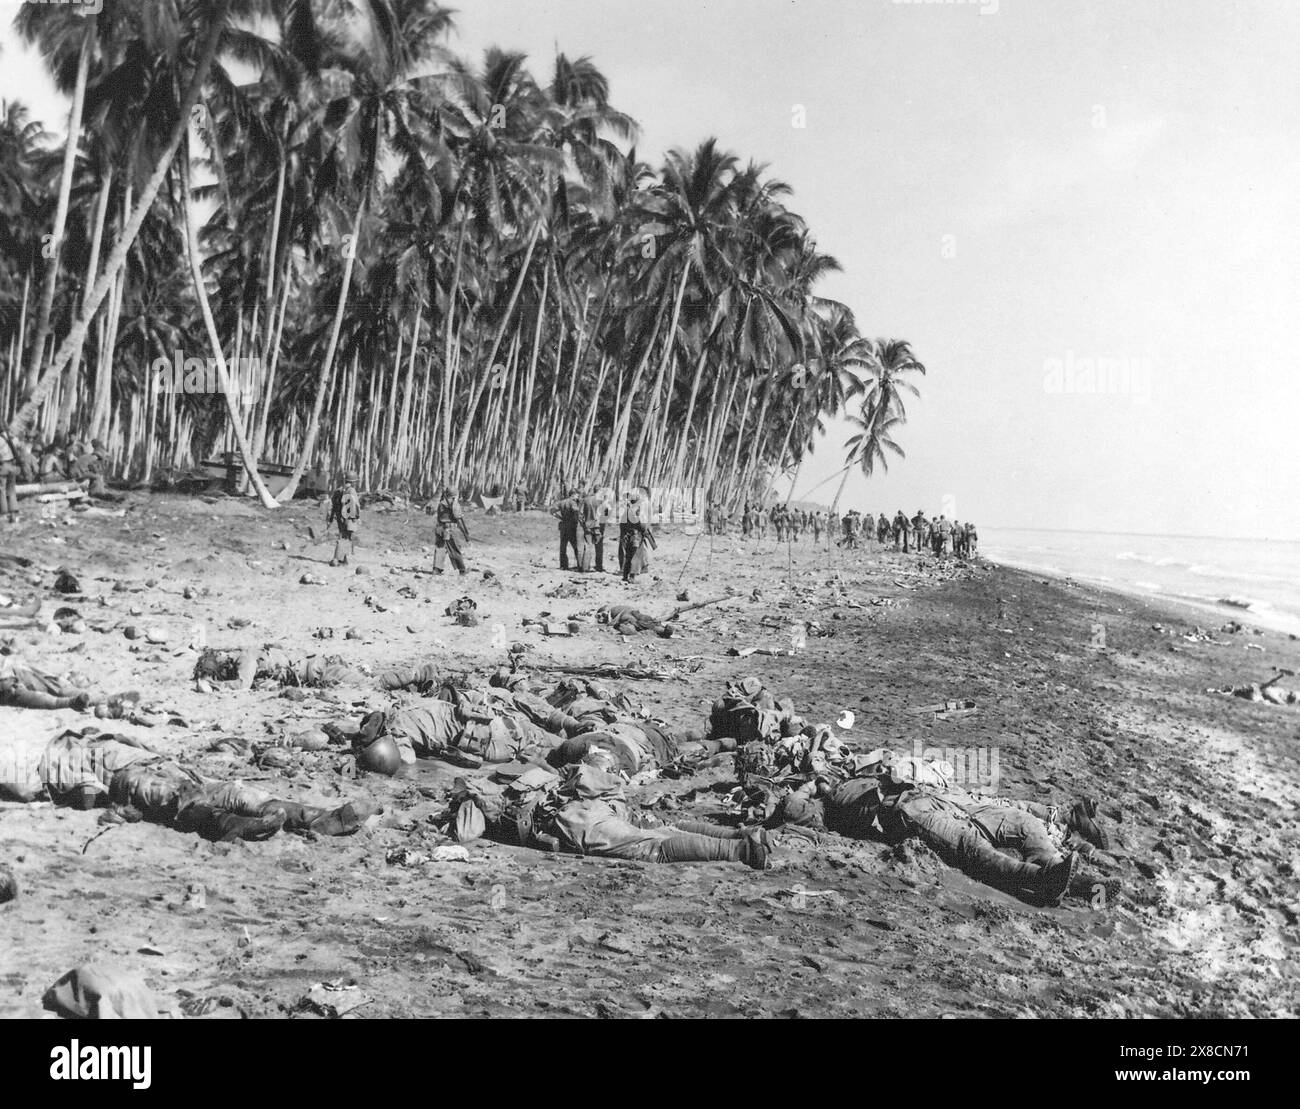 Guadalcanal. Dead Japanese soldiers at the mouth of Alligator Creek during the Guadalcanal Campaign l on 21 August 1942,  after being killed by U.S. Marines during the Battle of the Tenaru. Stock Photo